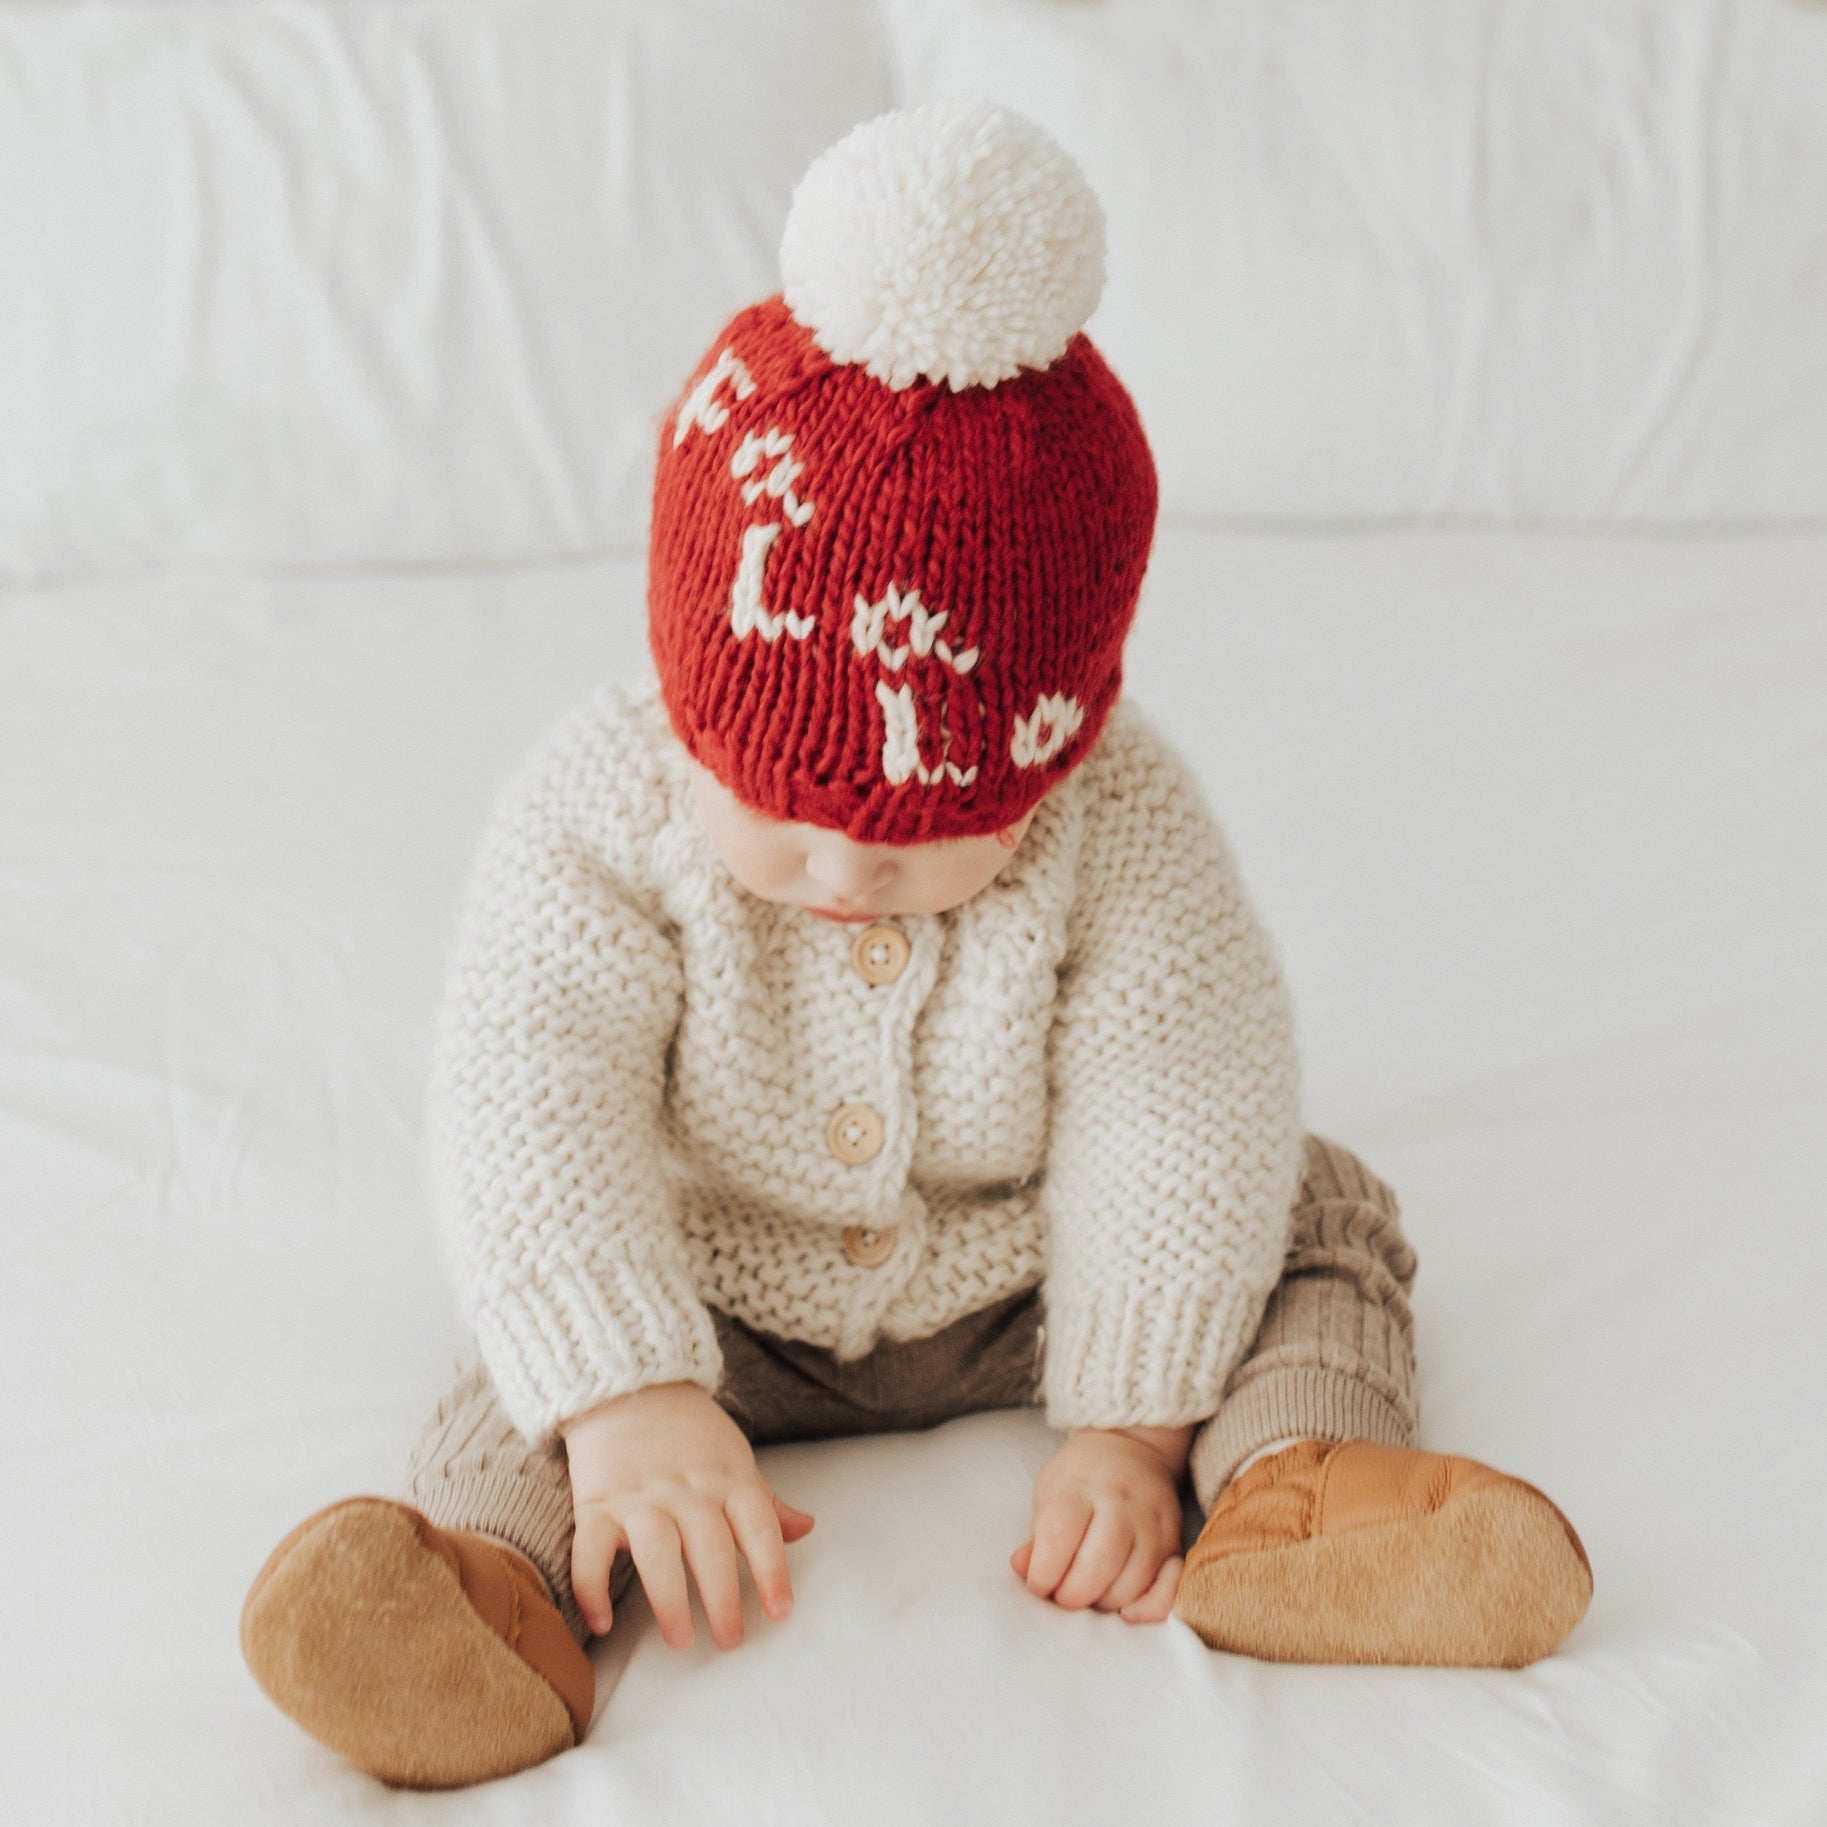 Huggalugs Champagne Chenille Beanie Hat S (0-6 Months)